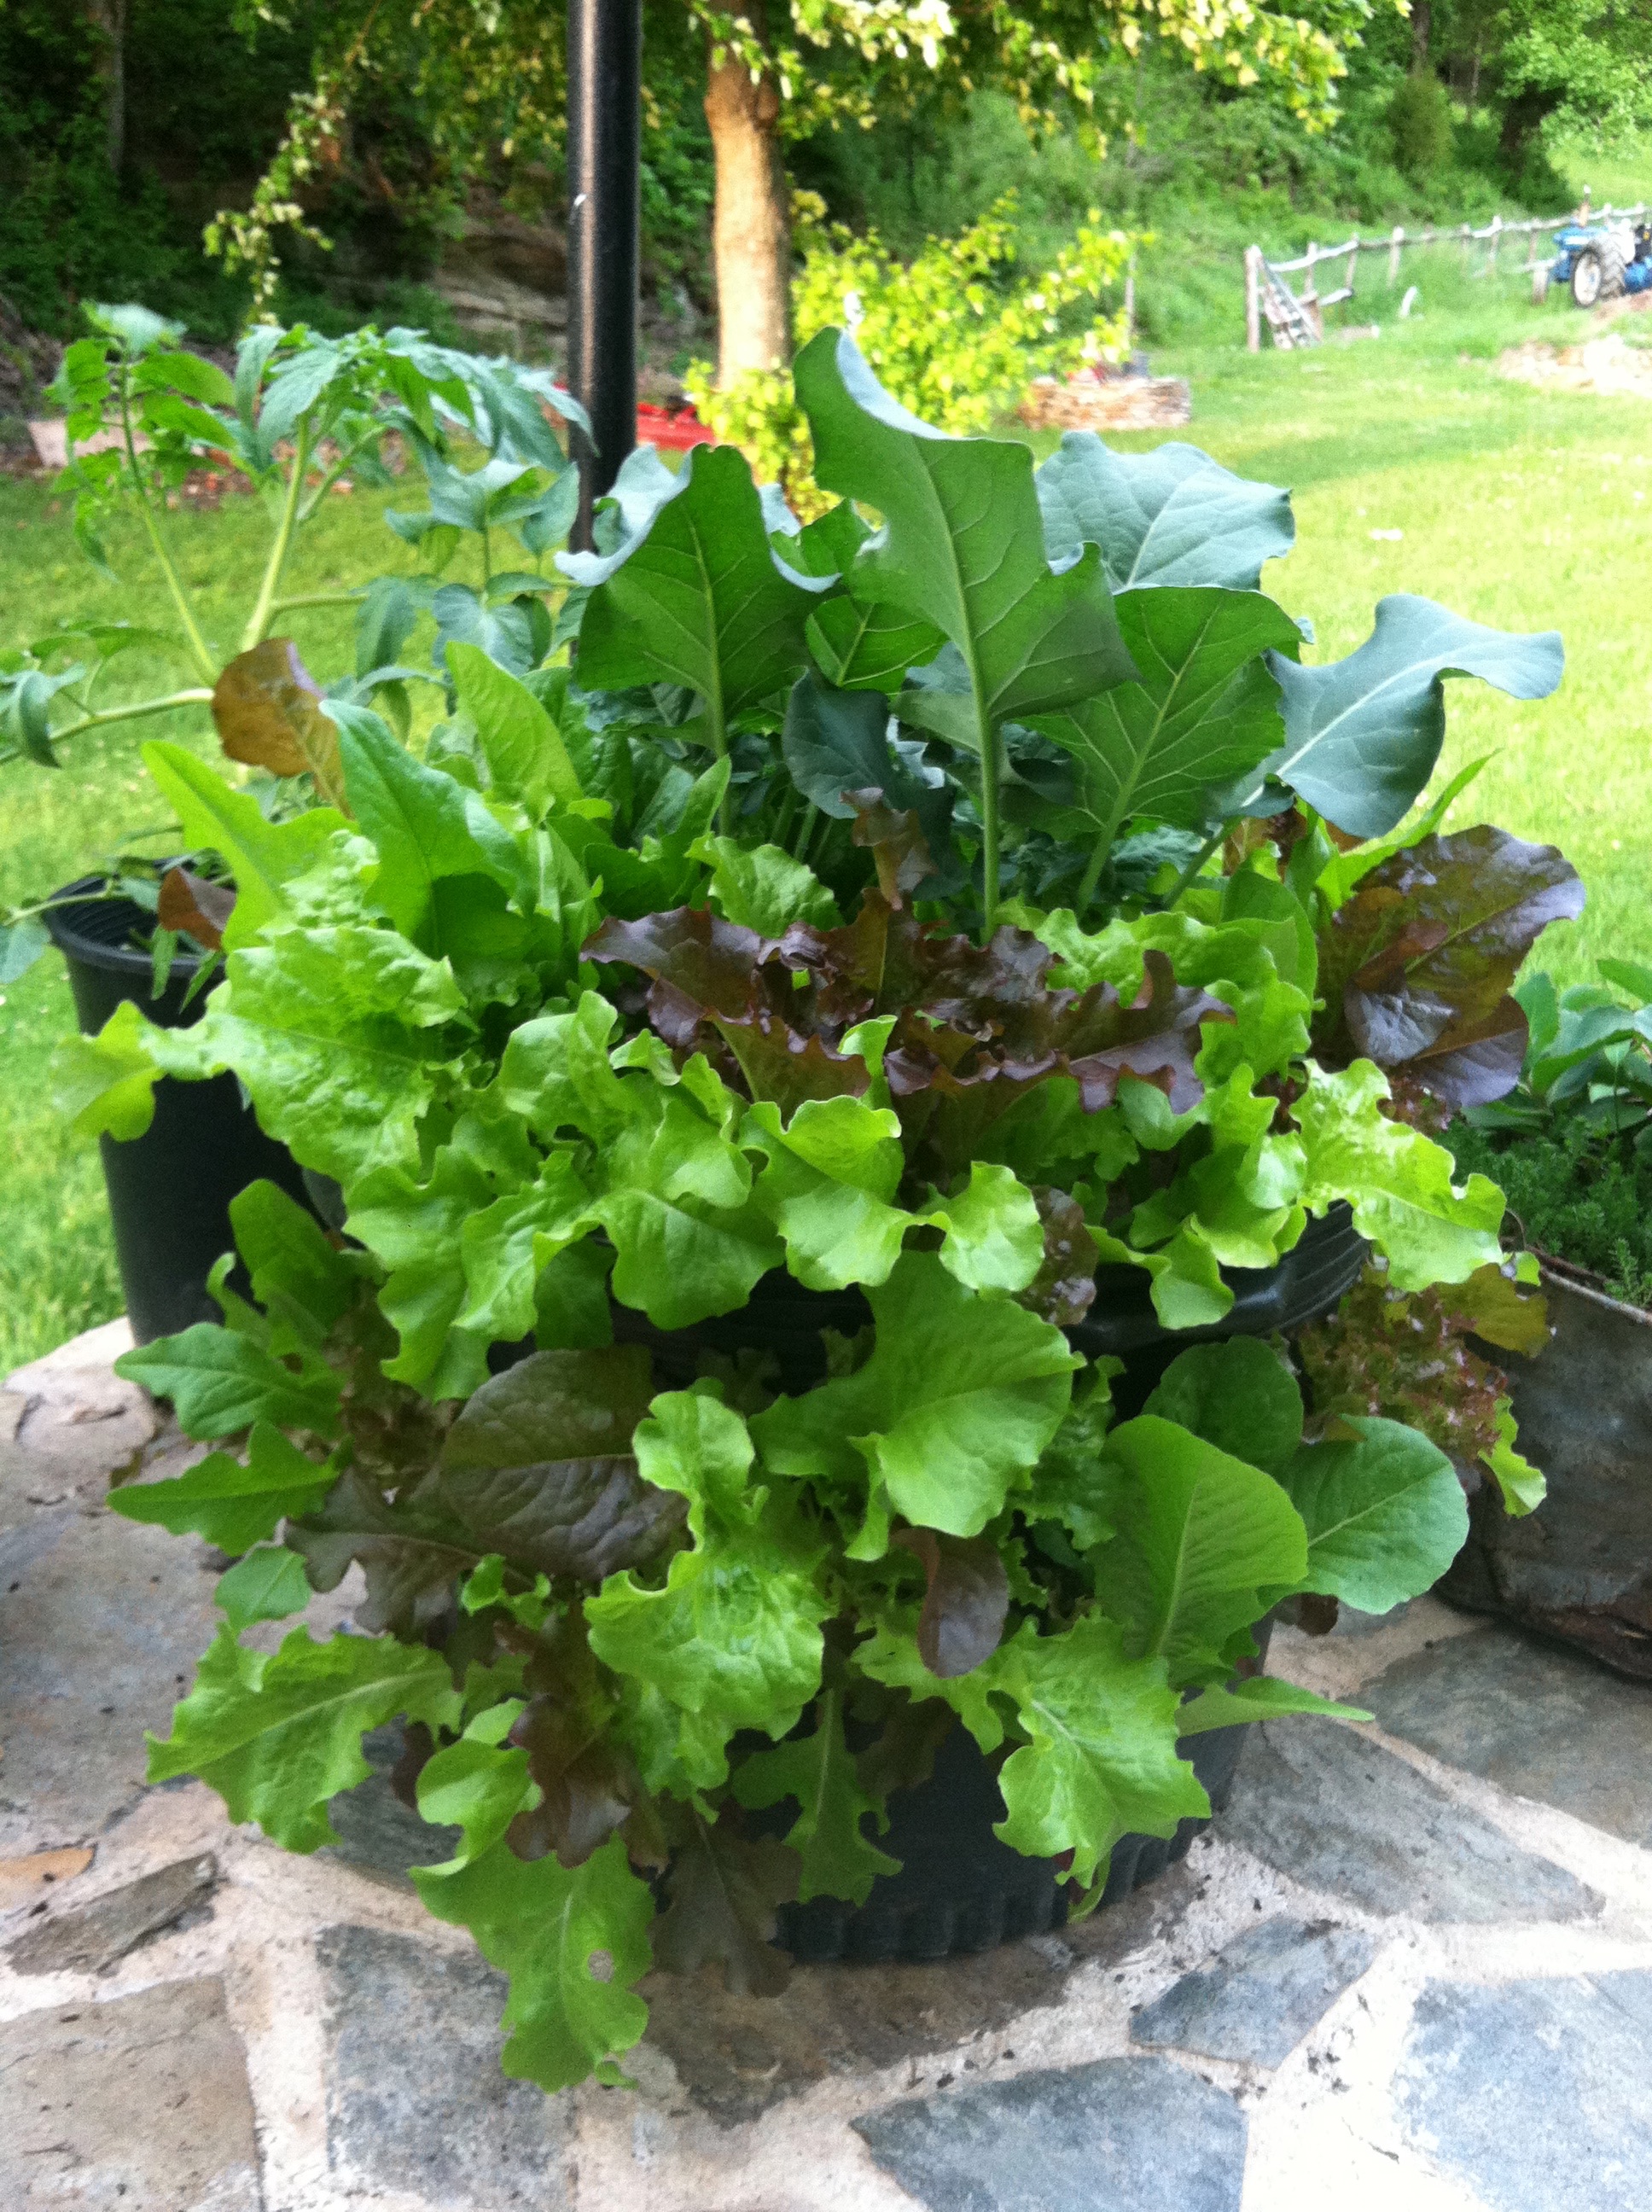 A fully grown lettuce container garden